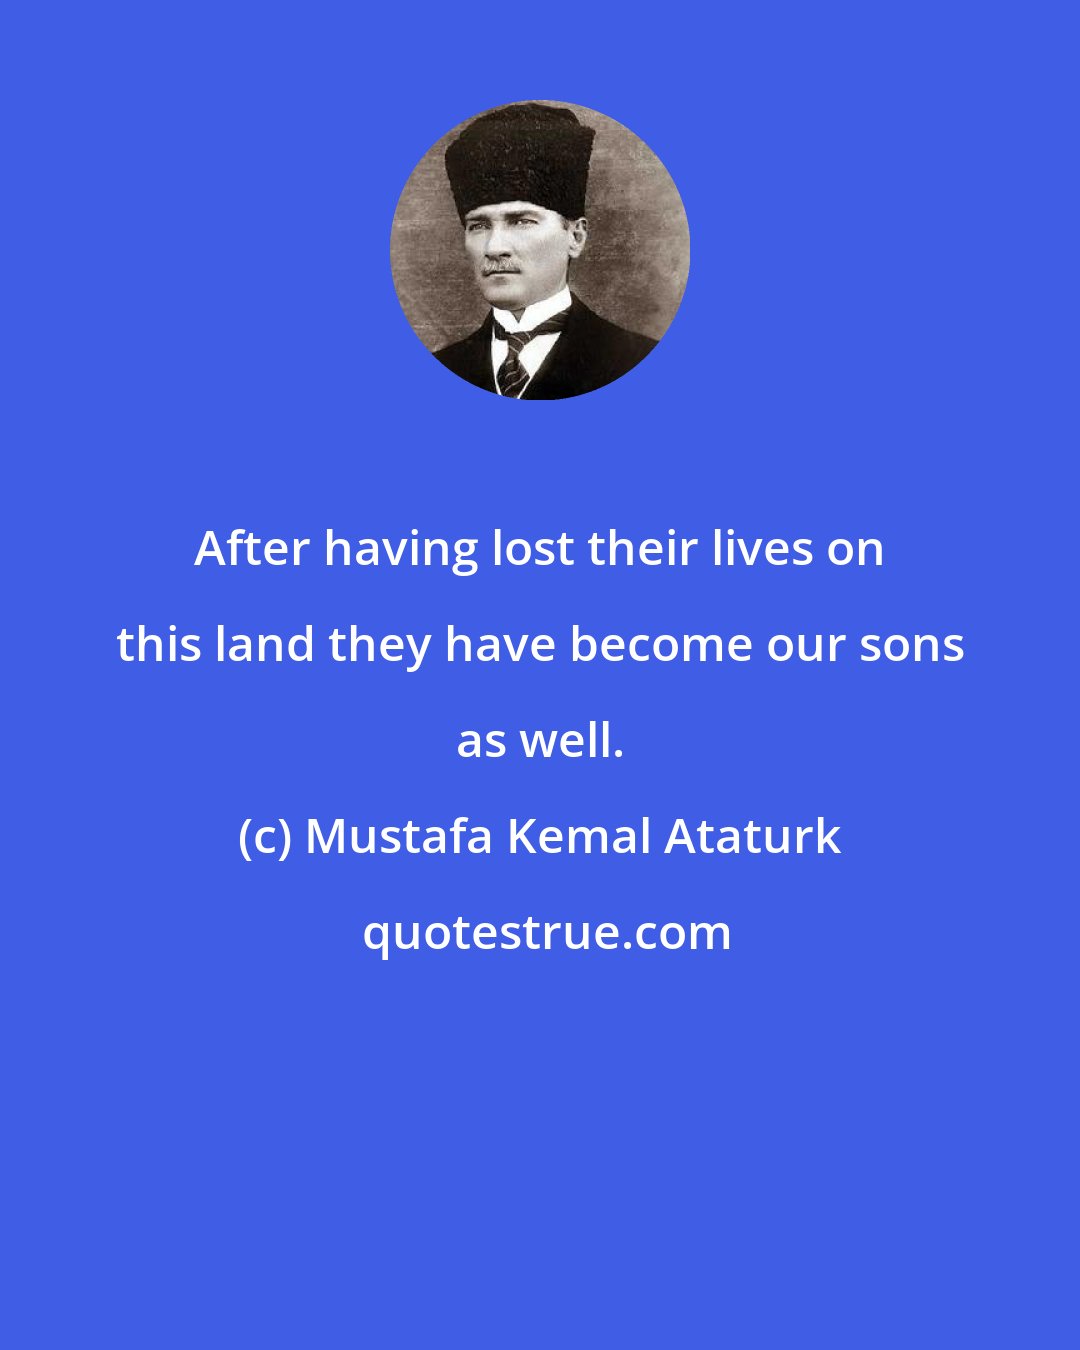 Mustafa Kemal Ataturk: After having lost their lives on this land they have become our sons as well.